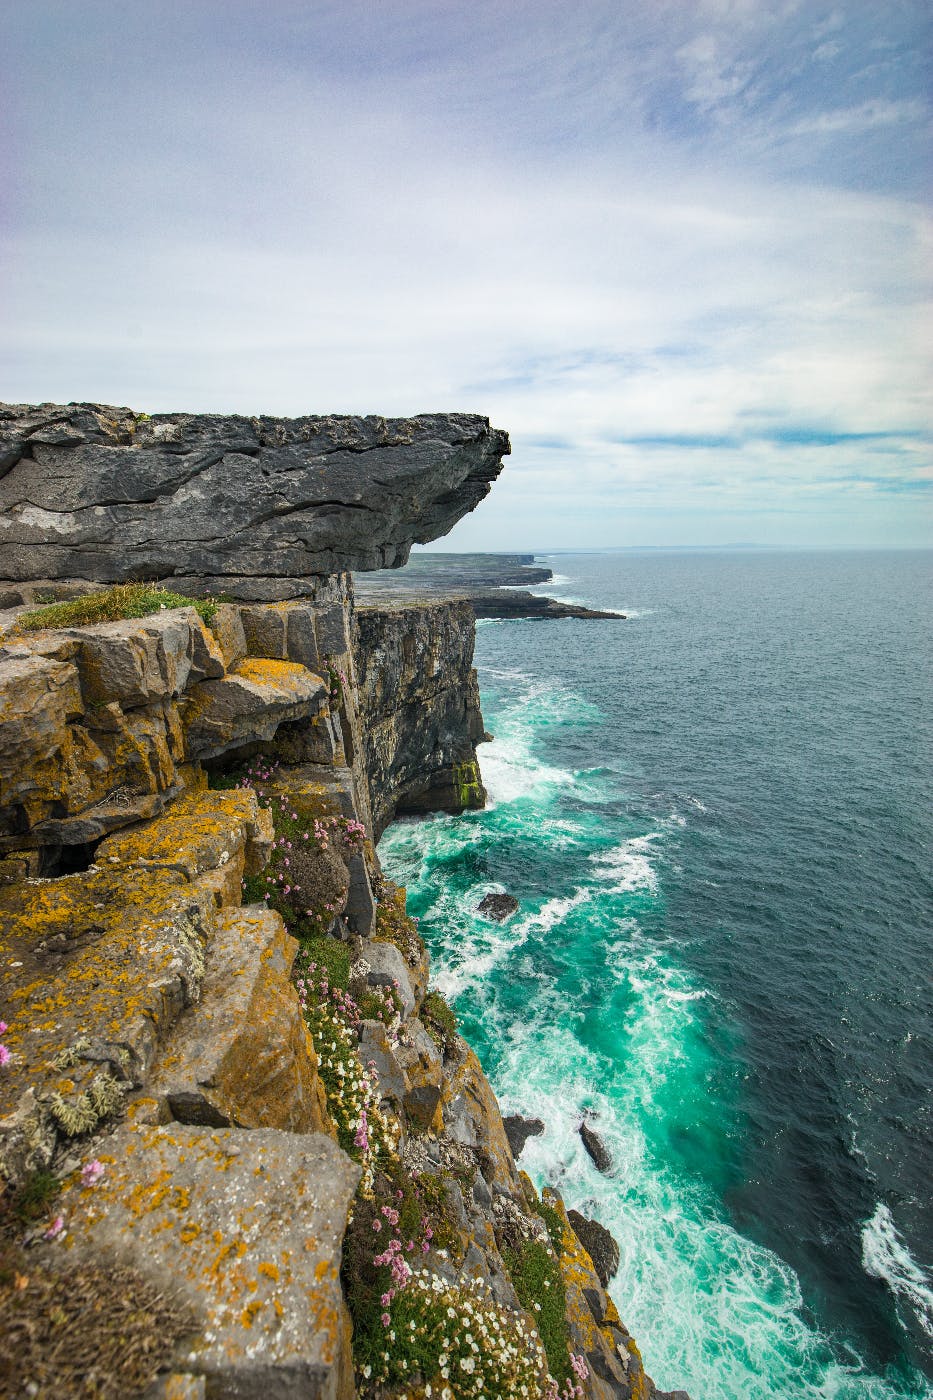 A terrifying cliff overhanging a rocky shoreline